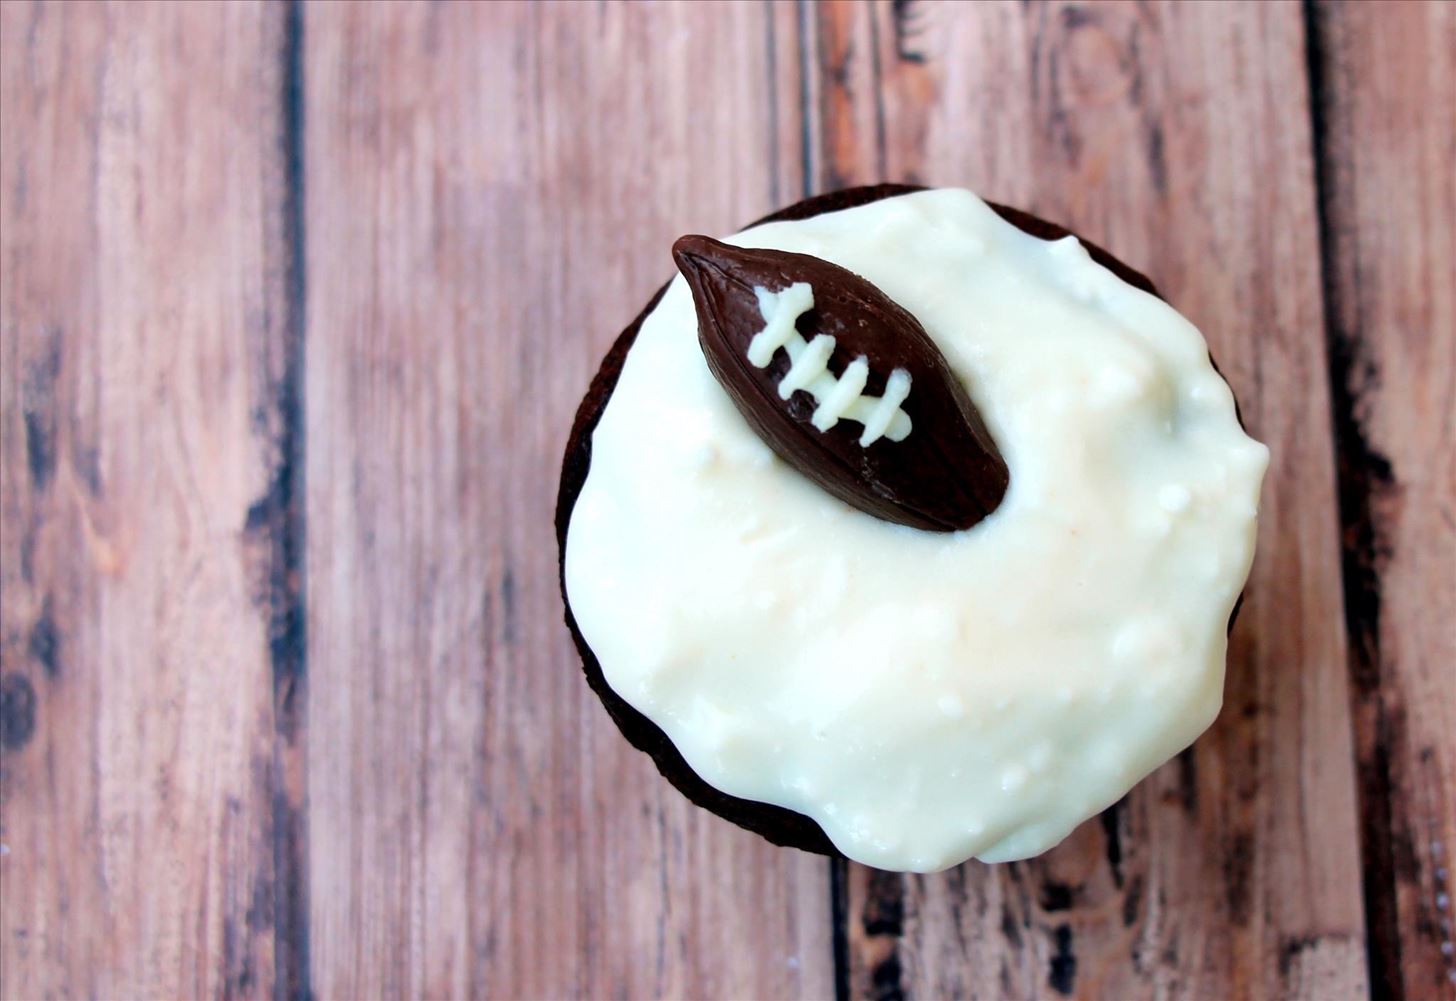 Super Bowl Snacks: Gatorade-Infused Treats for Game Day